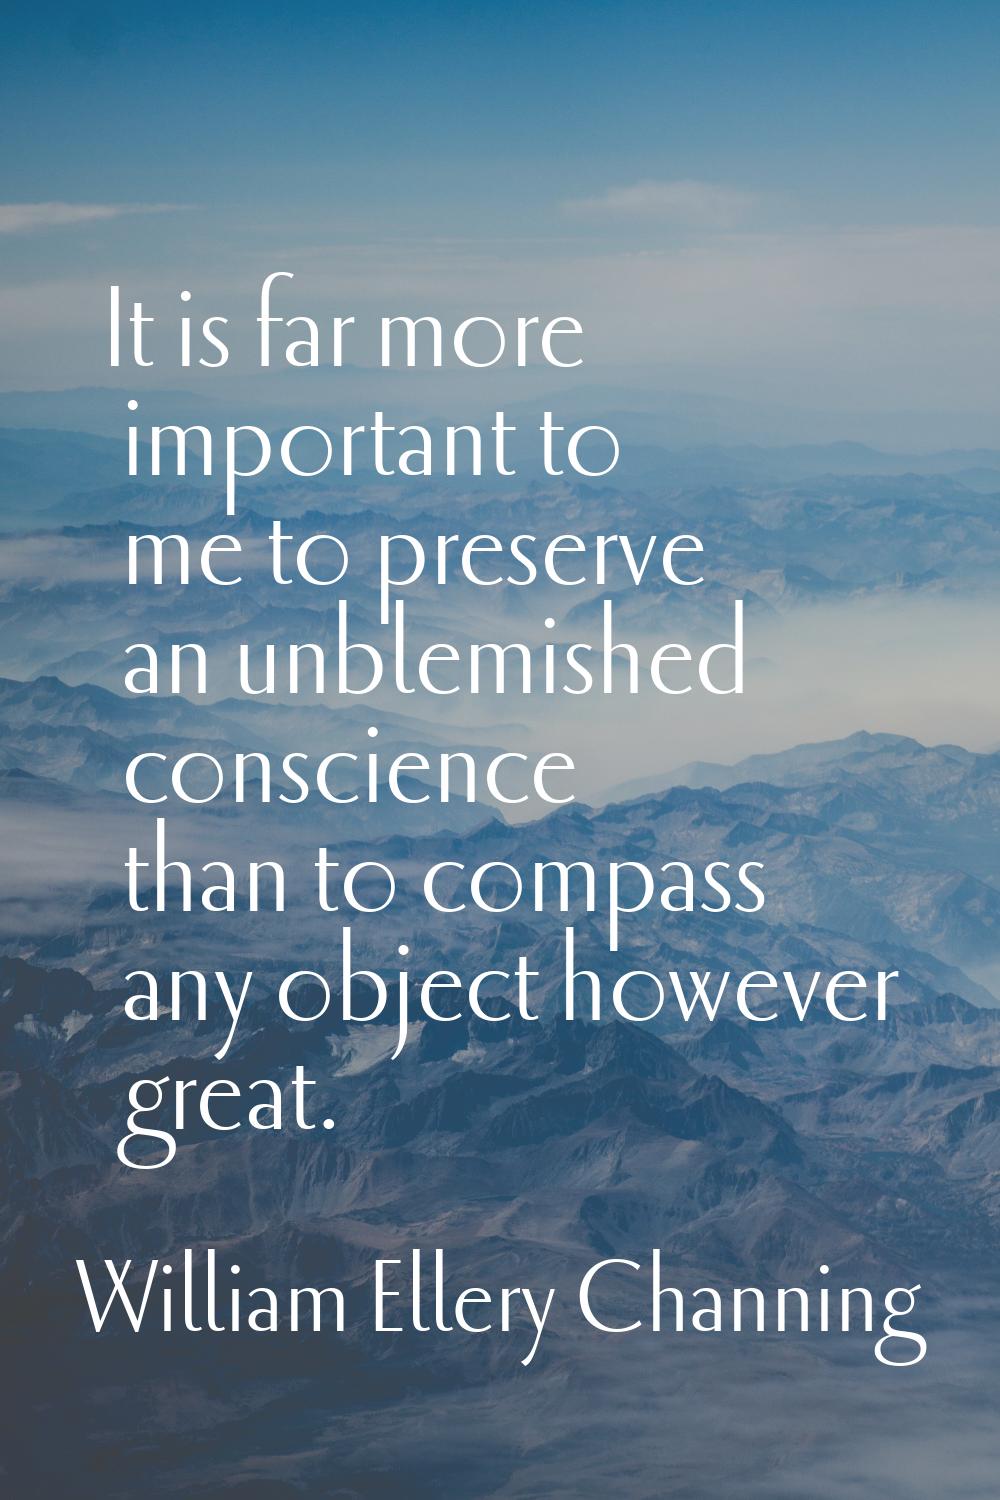 It is far more important to me to preserve an unblemished conscience than to compass any object how